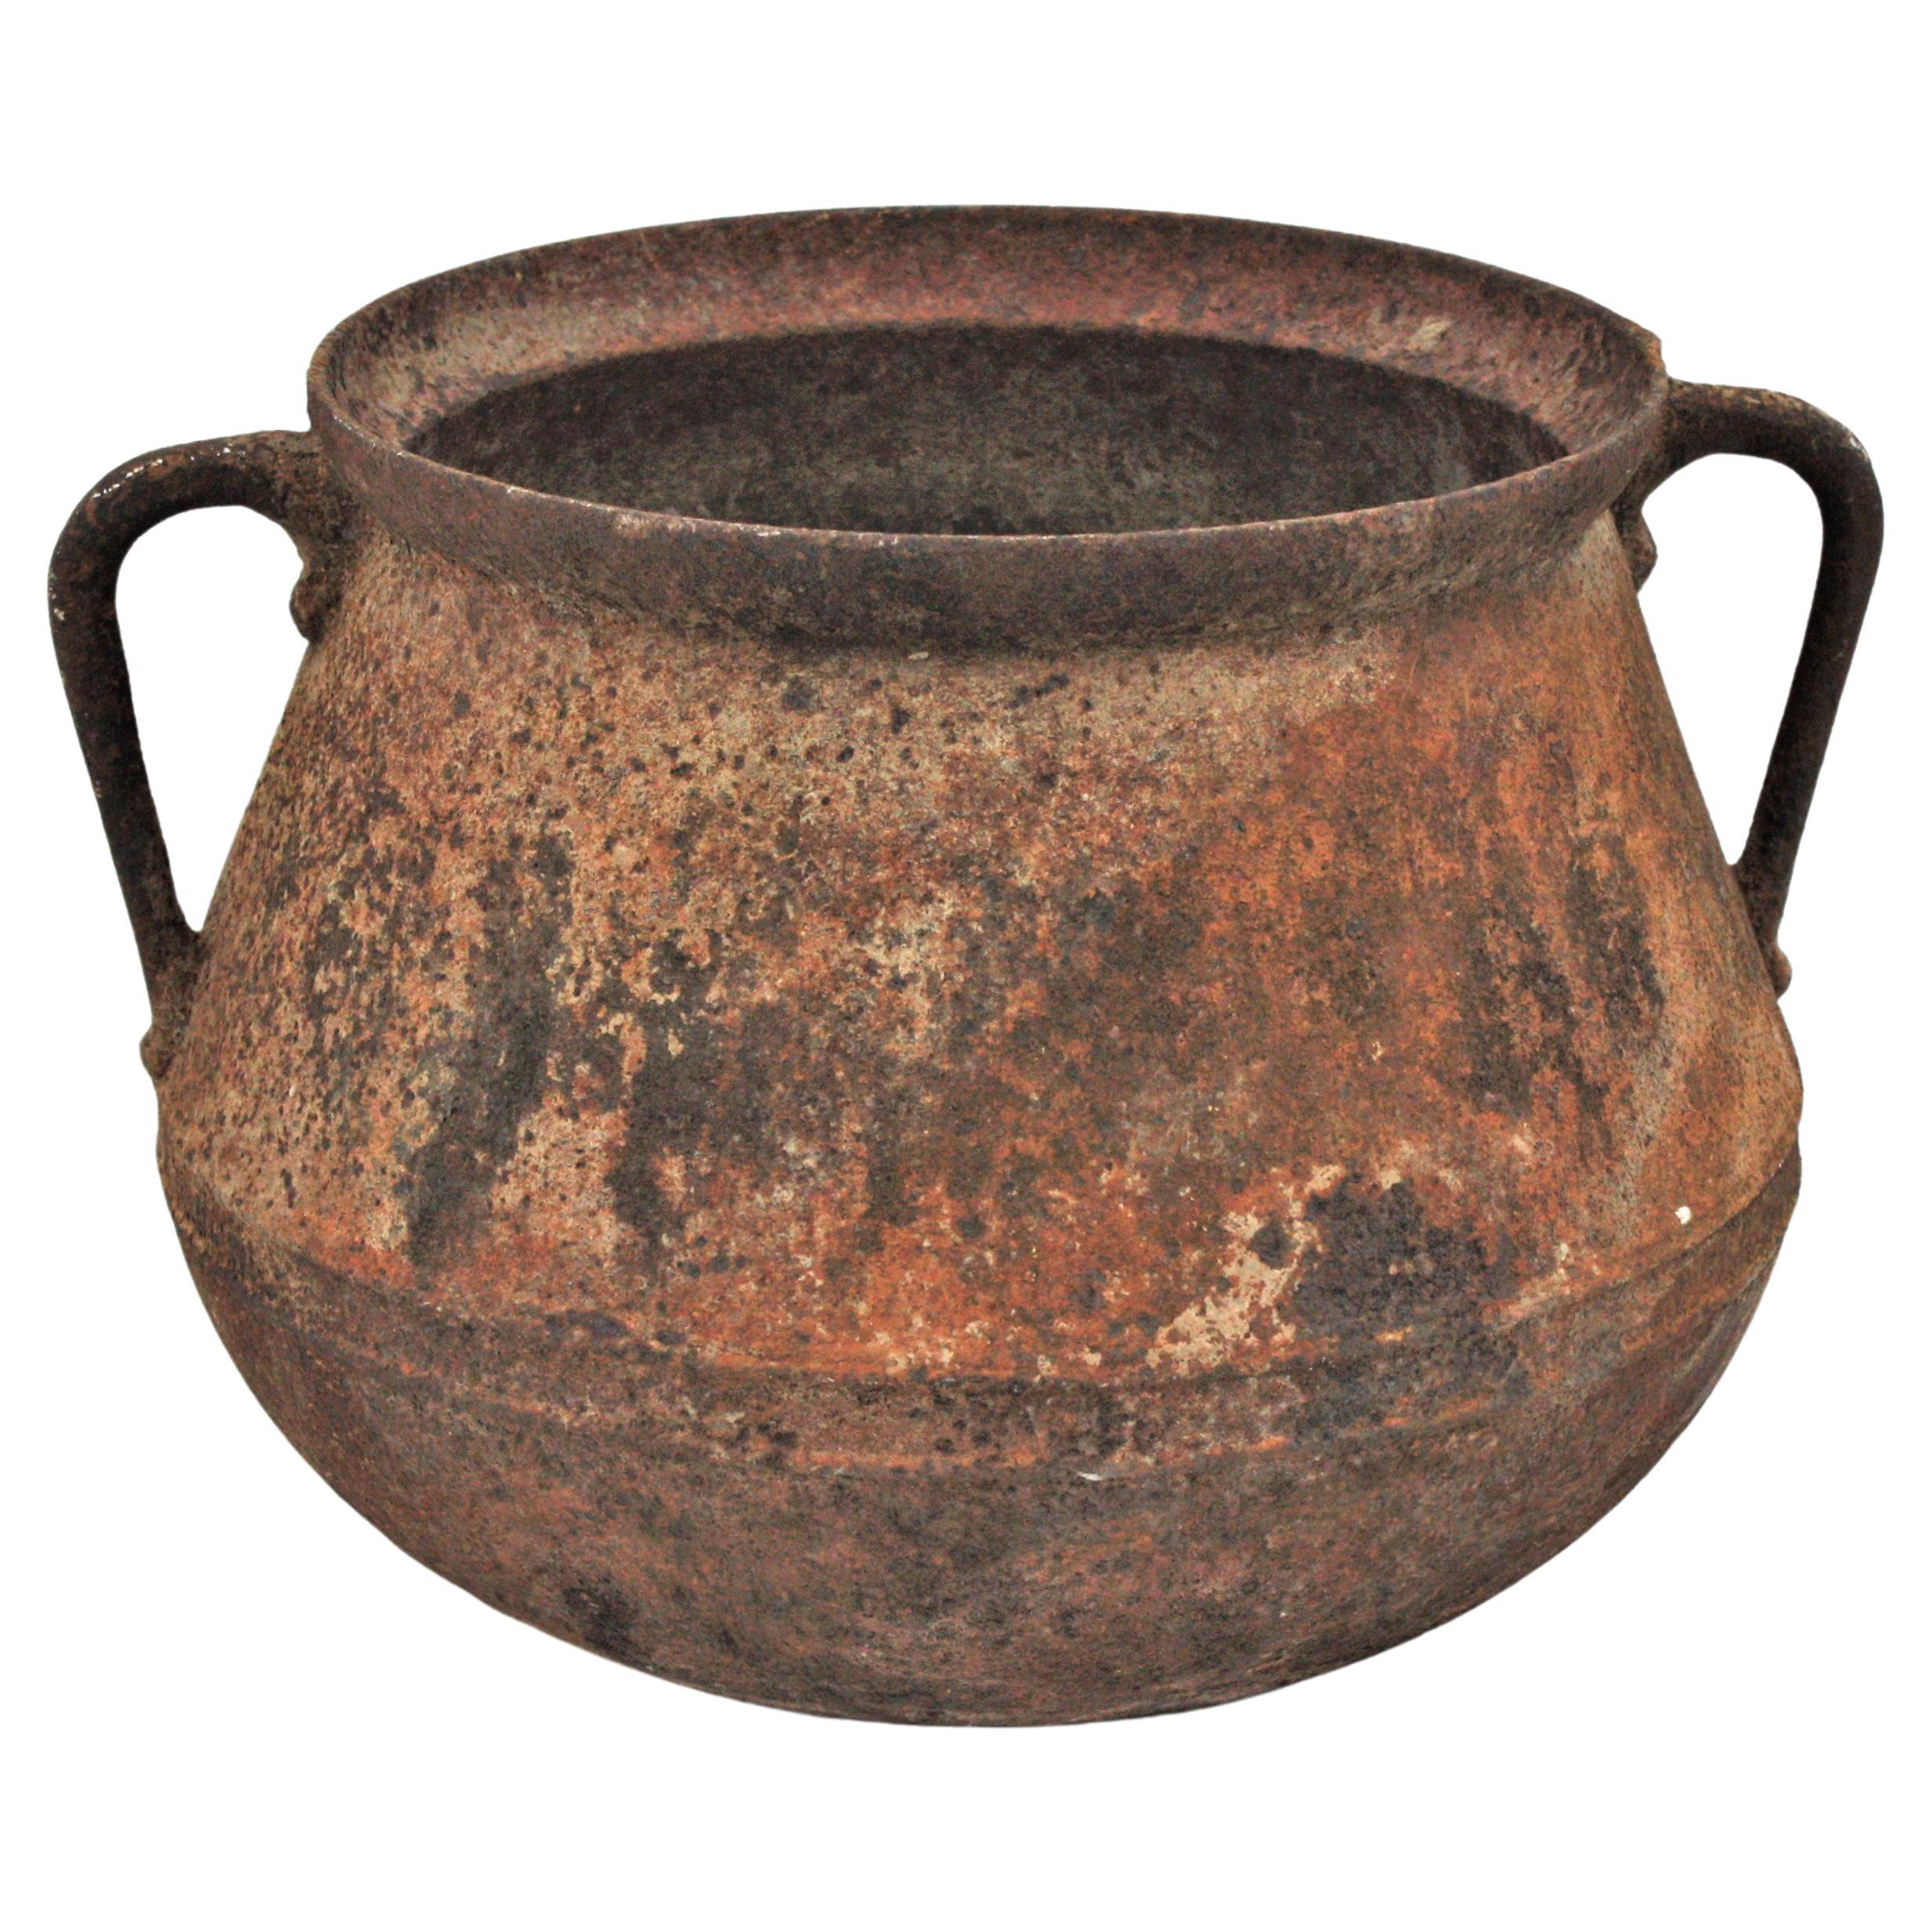 Primitive Rustic Iron Cauldron from the northern part of Spain, 1920s
Made in molded cast iron, originally used for cooking. 
This iron vessel is heavily constructed, it is strong and sturdy and it has a terrific aged patina showing a rusty